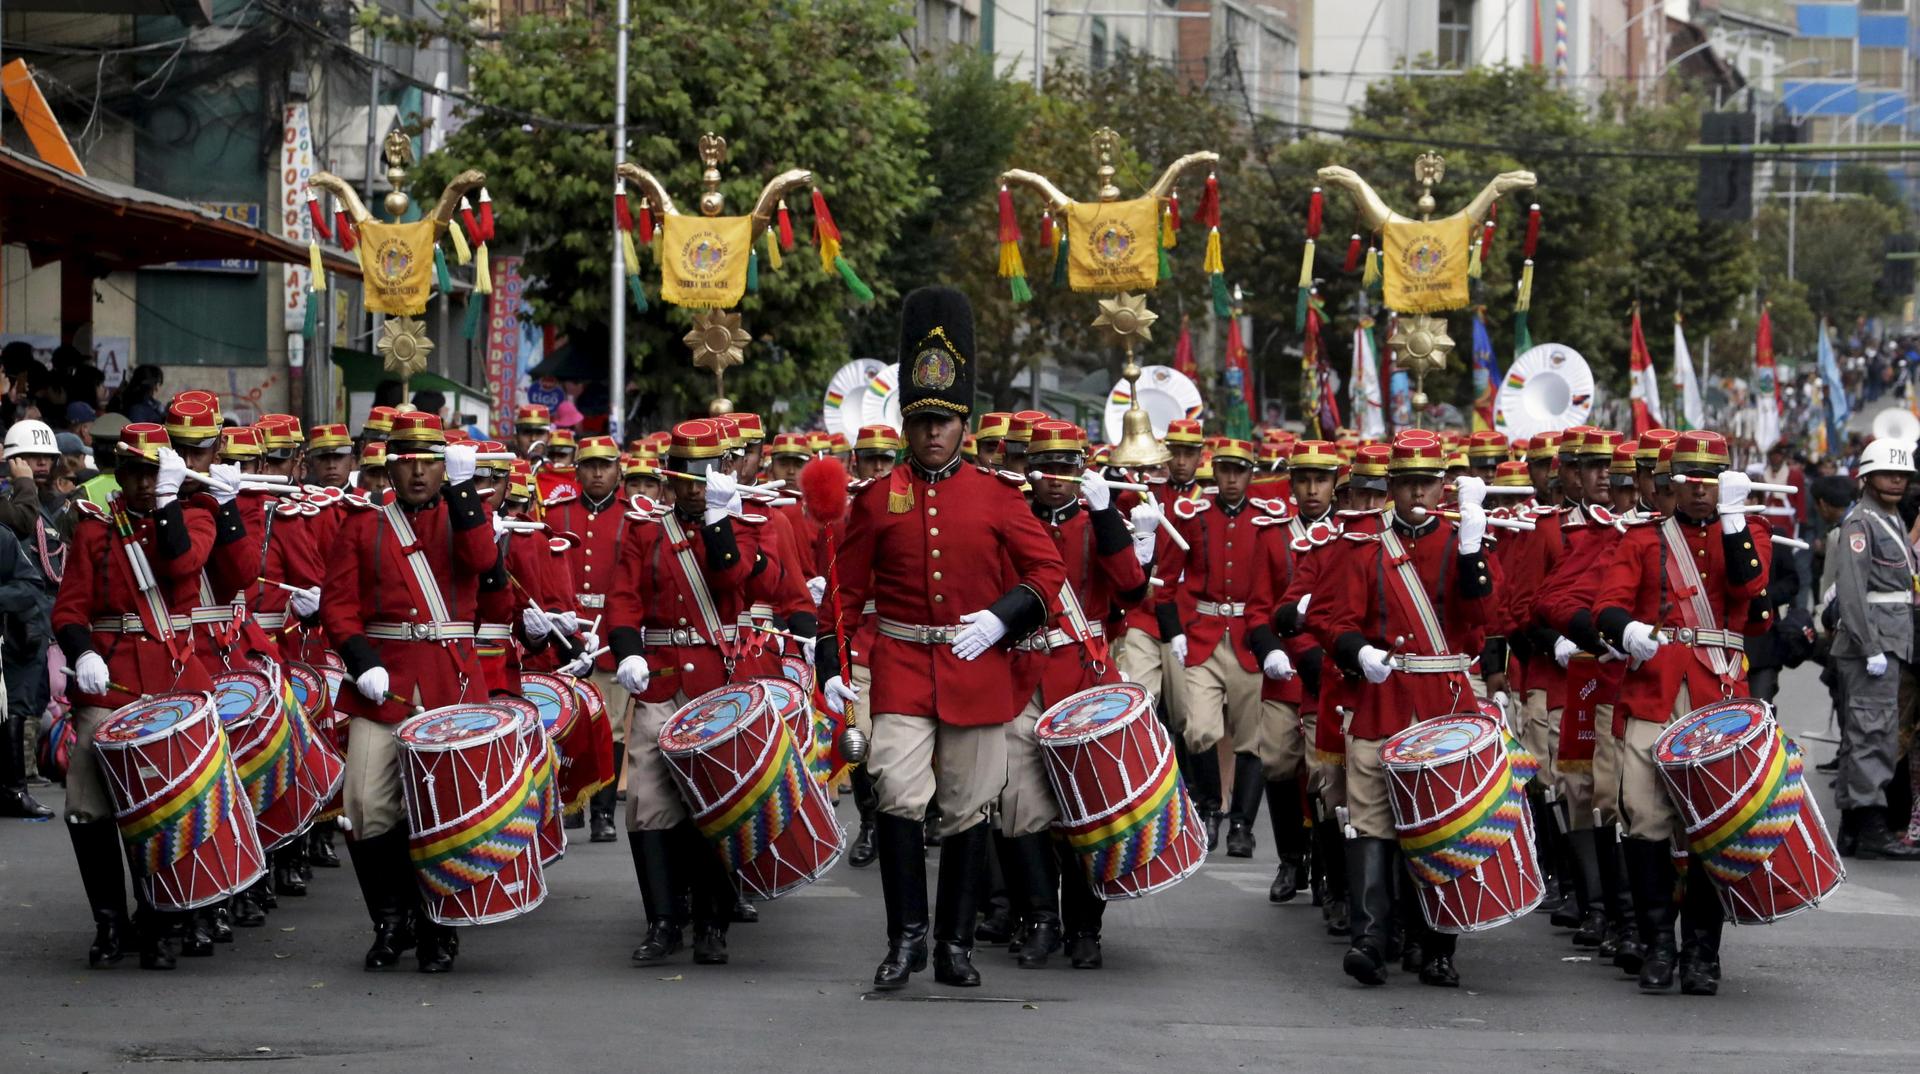 a string of men in red uniforms march with drums